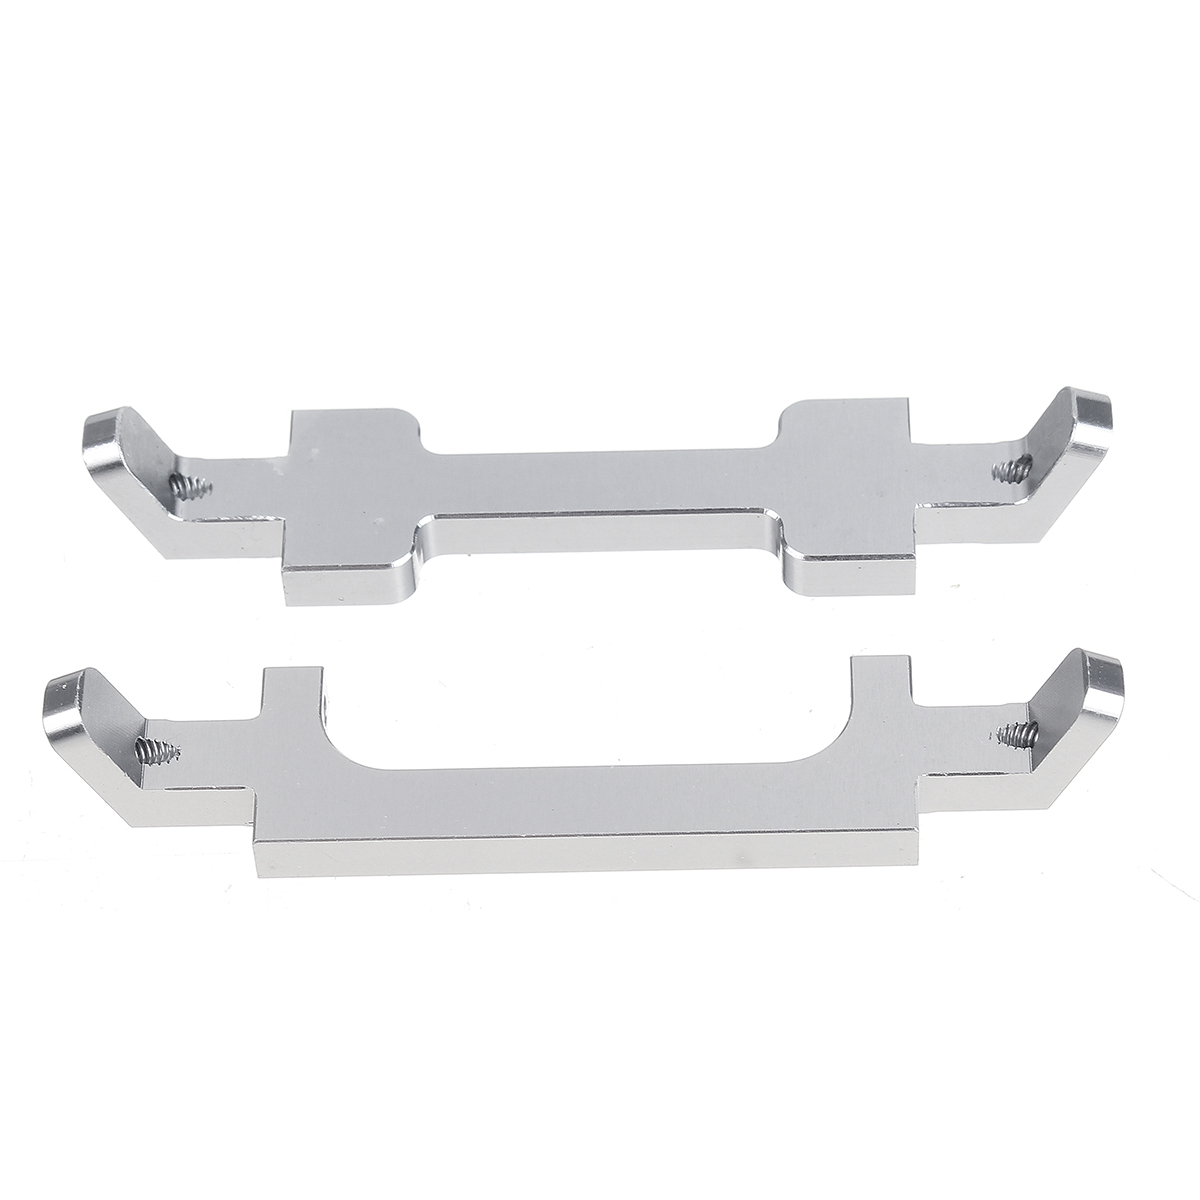 1 Pair Eachine E180 Landing Skid Support Plate RC Helicopter Parts